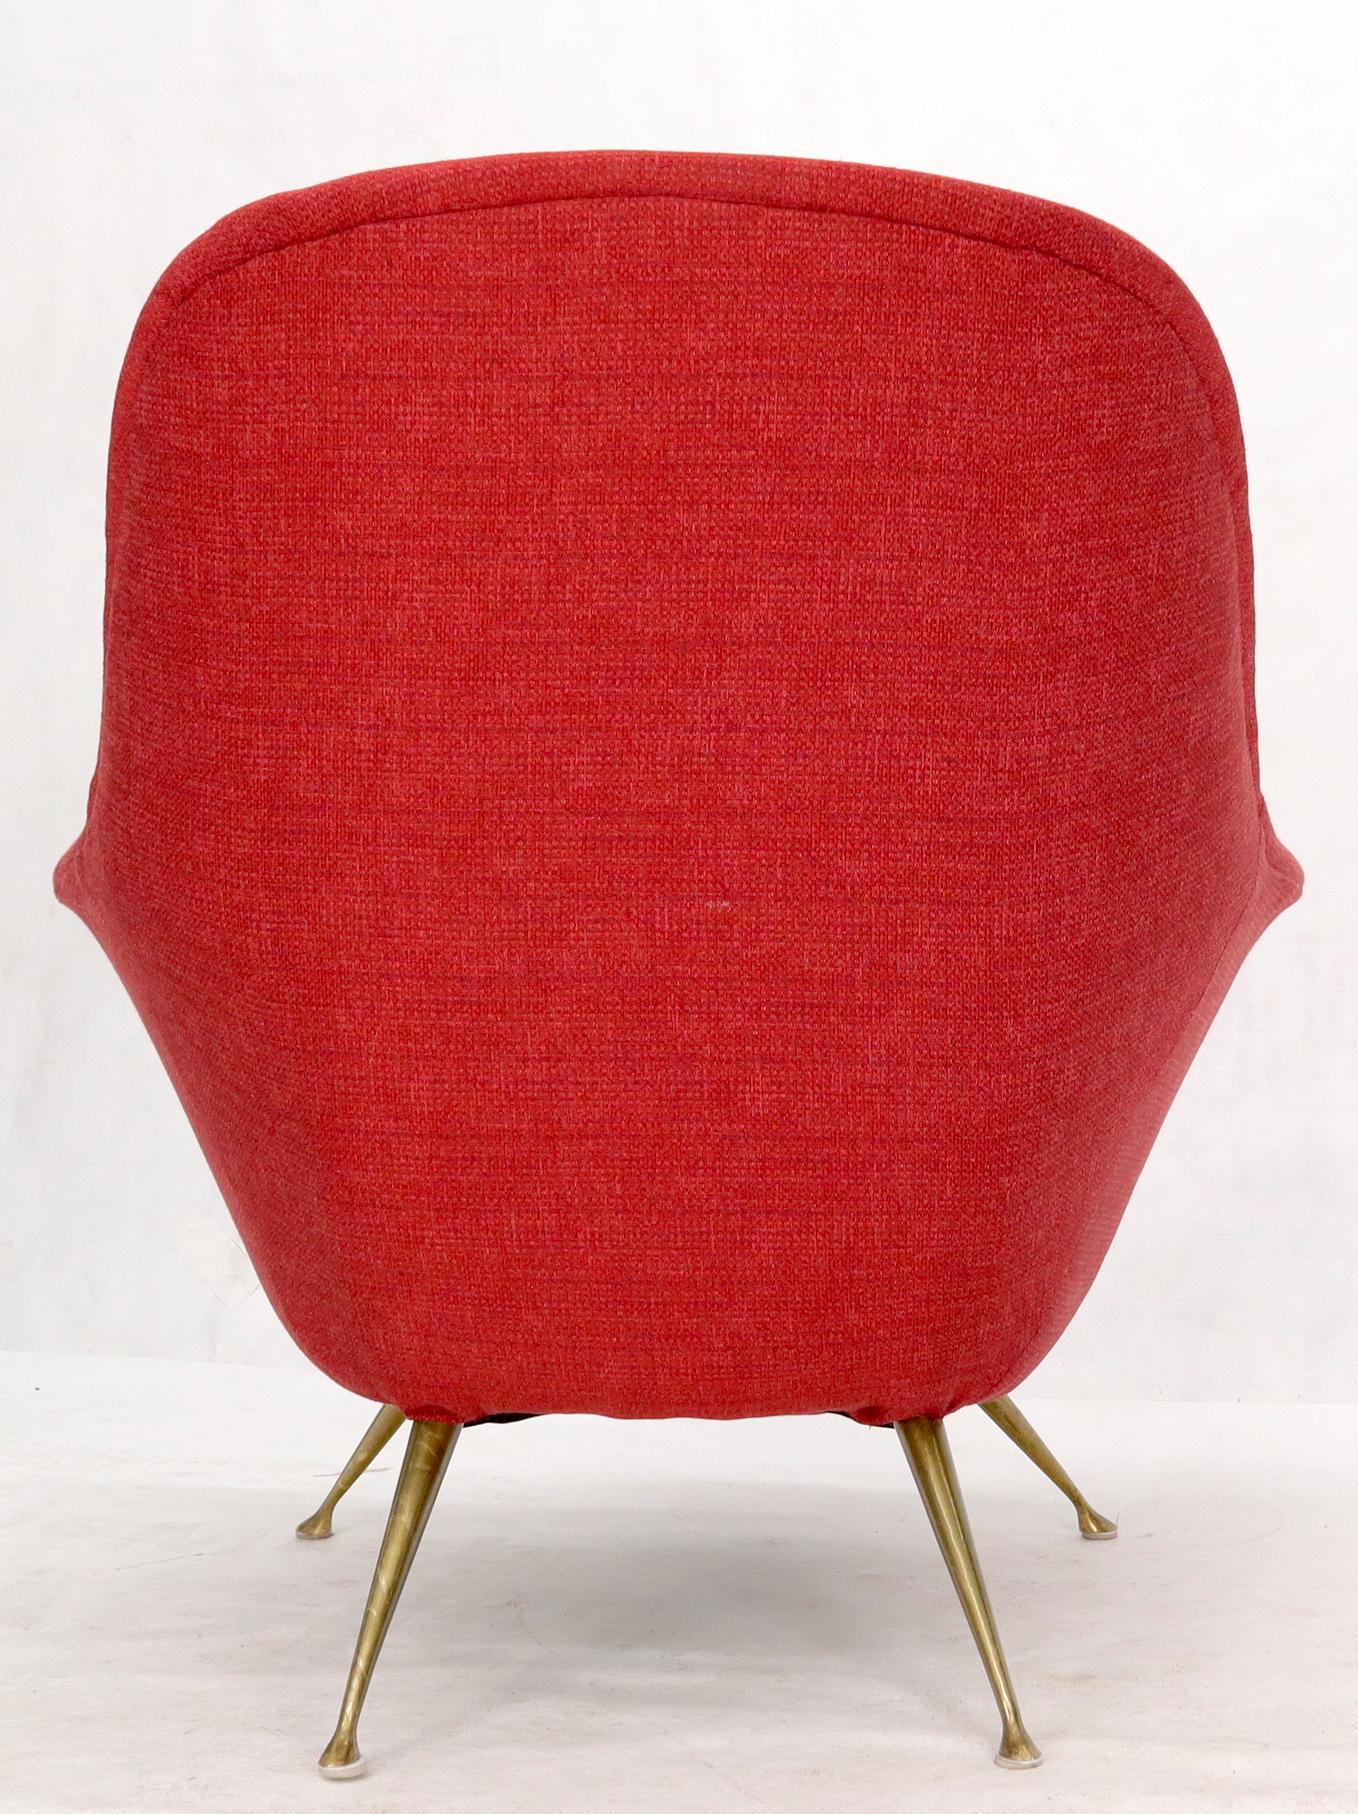 Italian Mid-Century Modern New Red Upholstery Lounge Chair on Solid Brass Legs For Sale 10